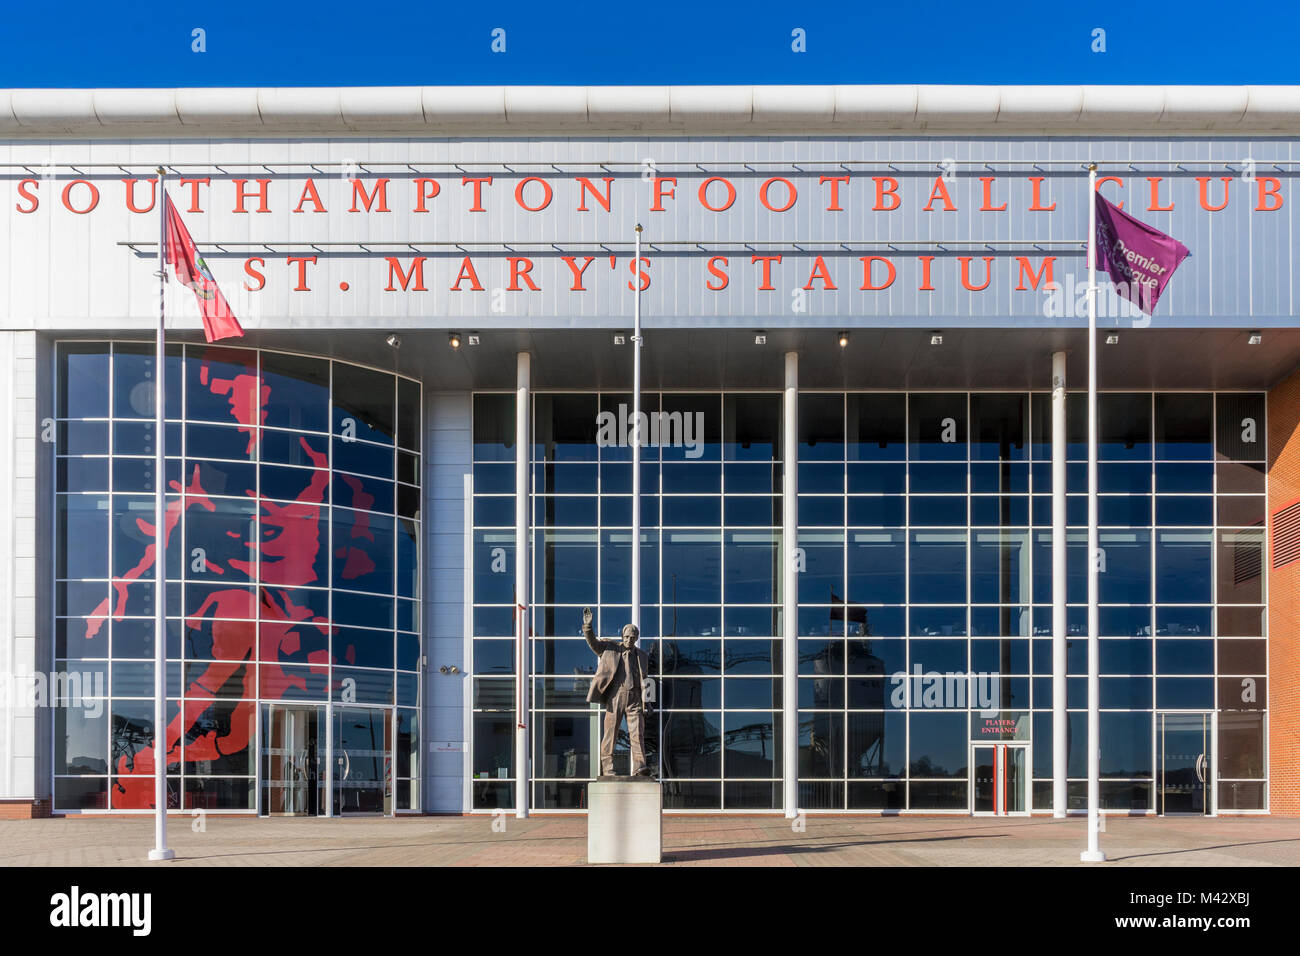 Front facade of St. Mary's football stadium home to Southampton Football Club with the Ted Bates statue in the foreground, Southampton, England, UK Stock Photo